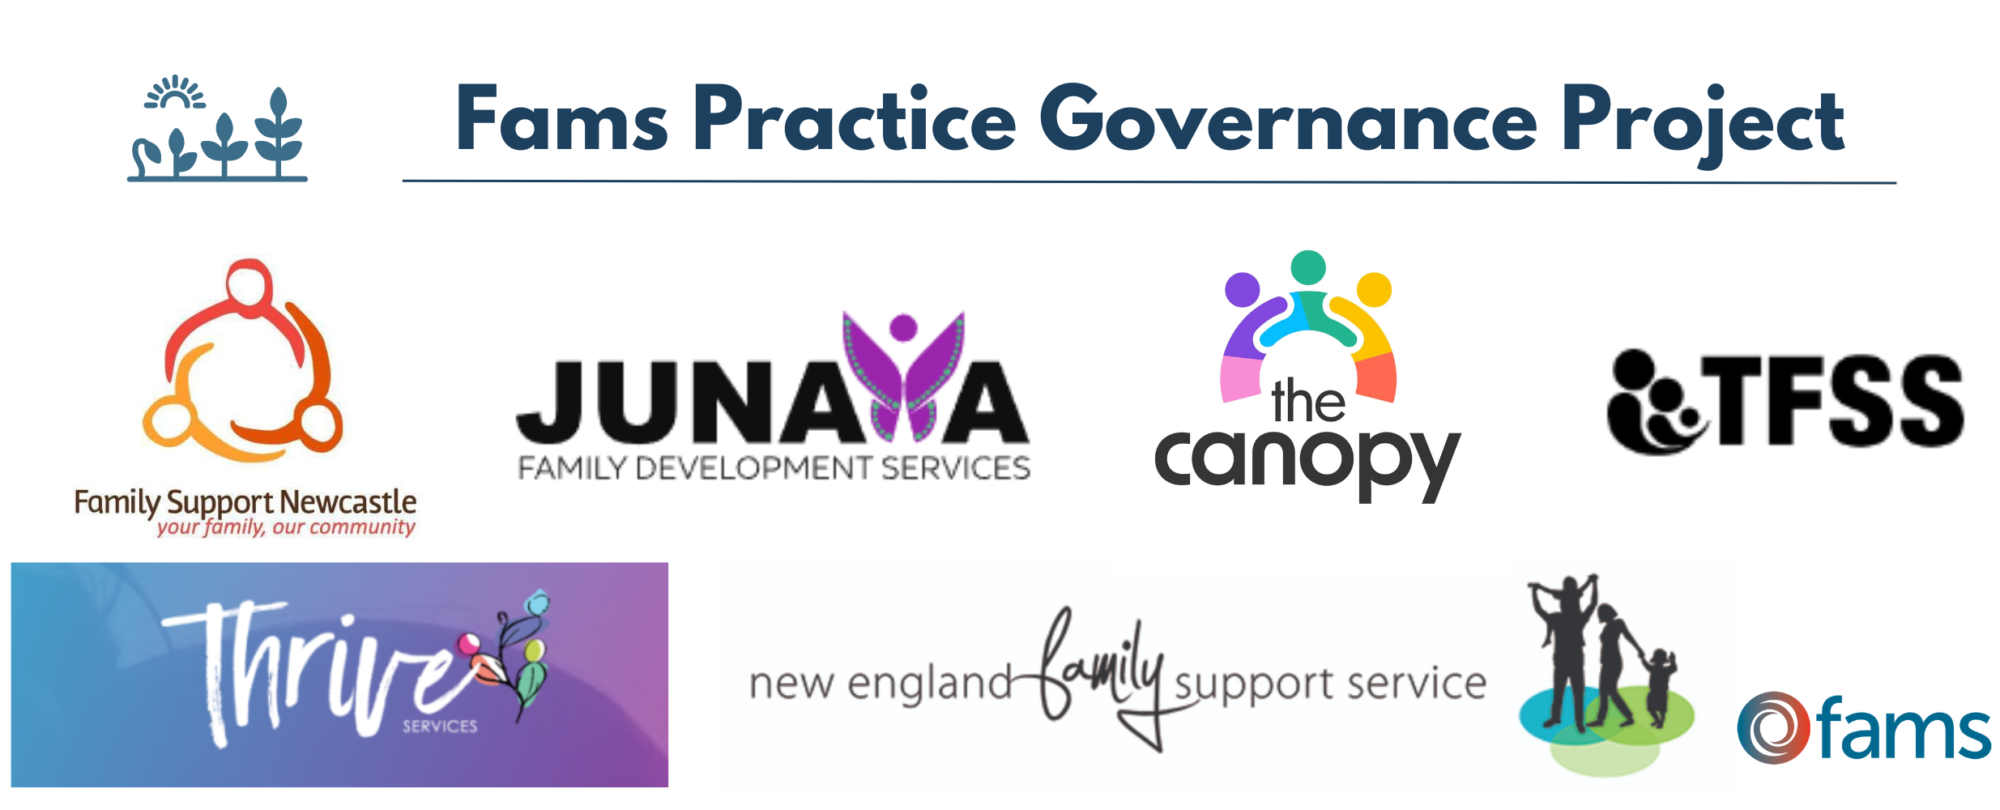 Introducing the Practice Governance project team!